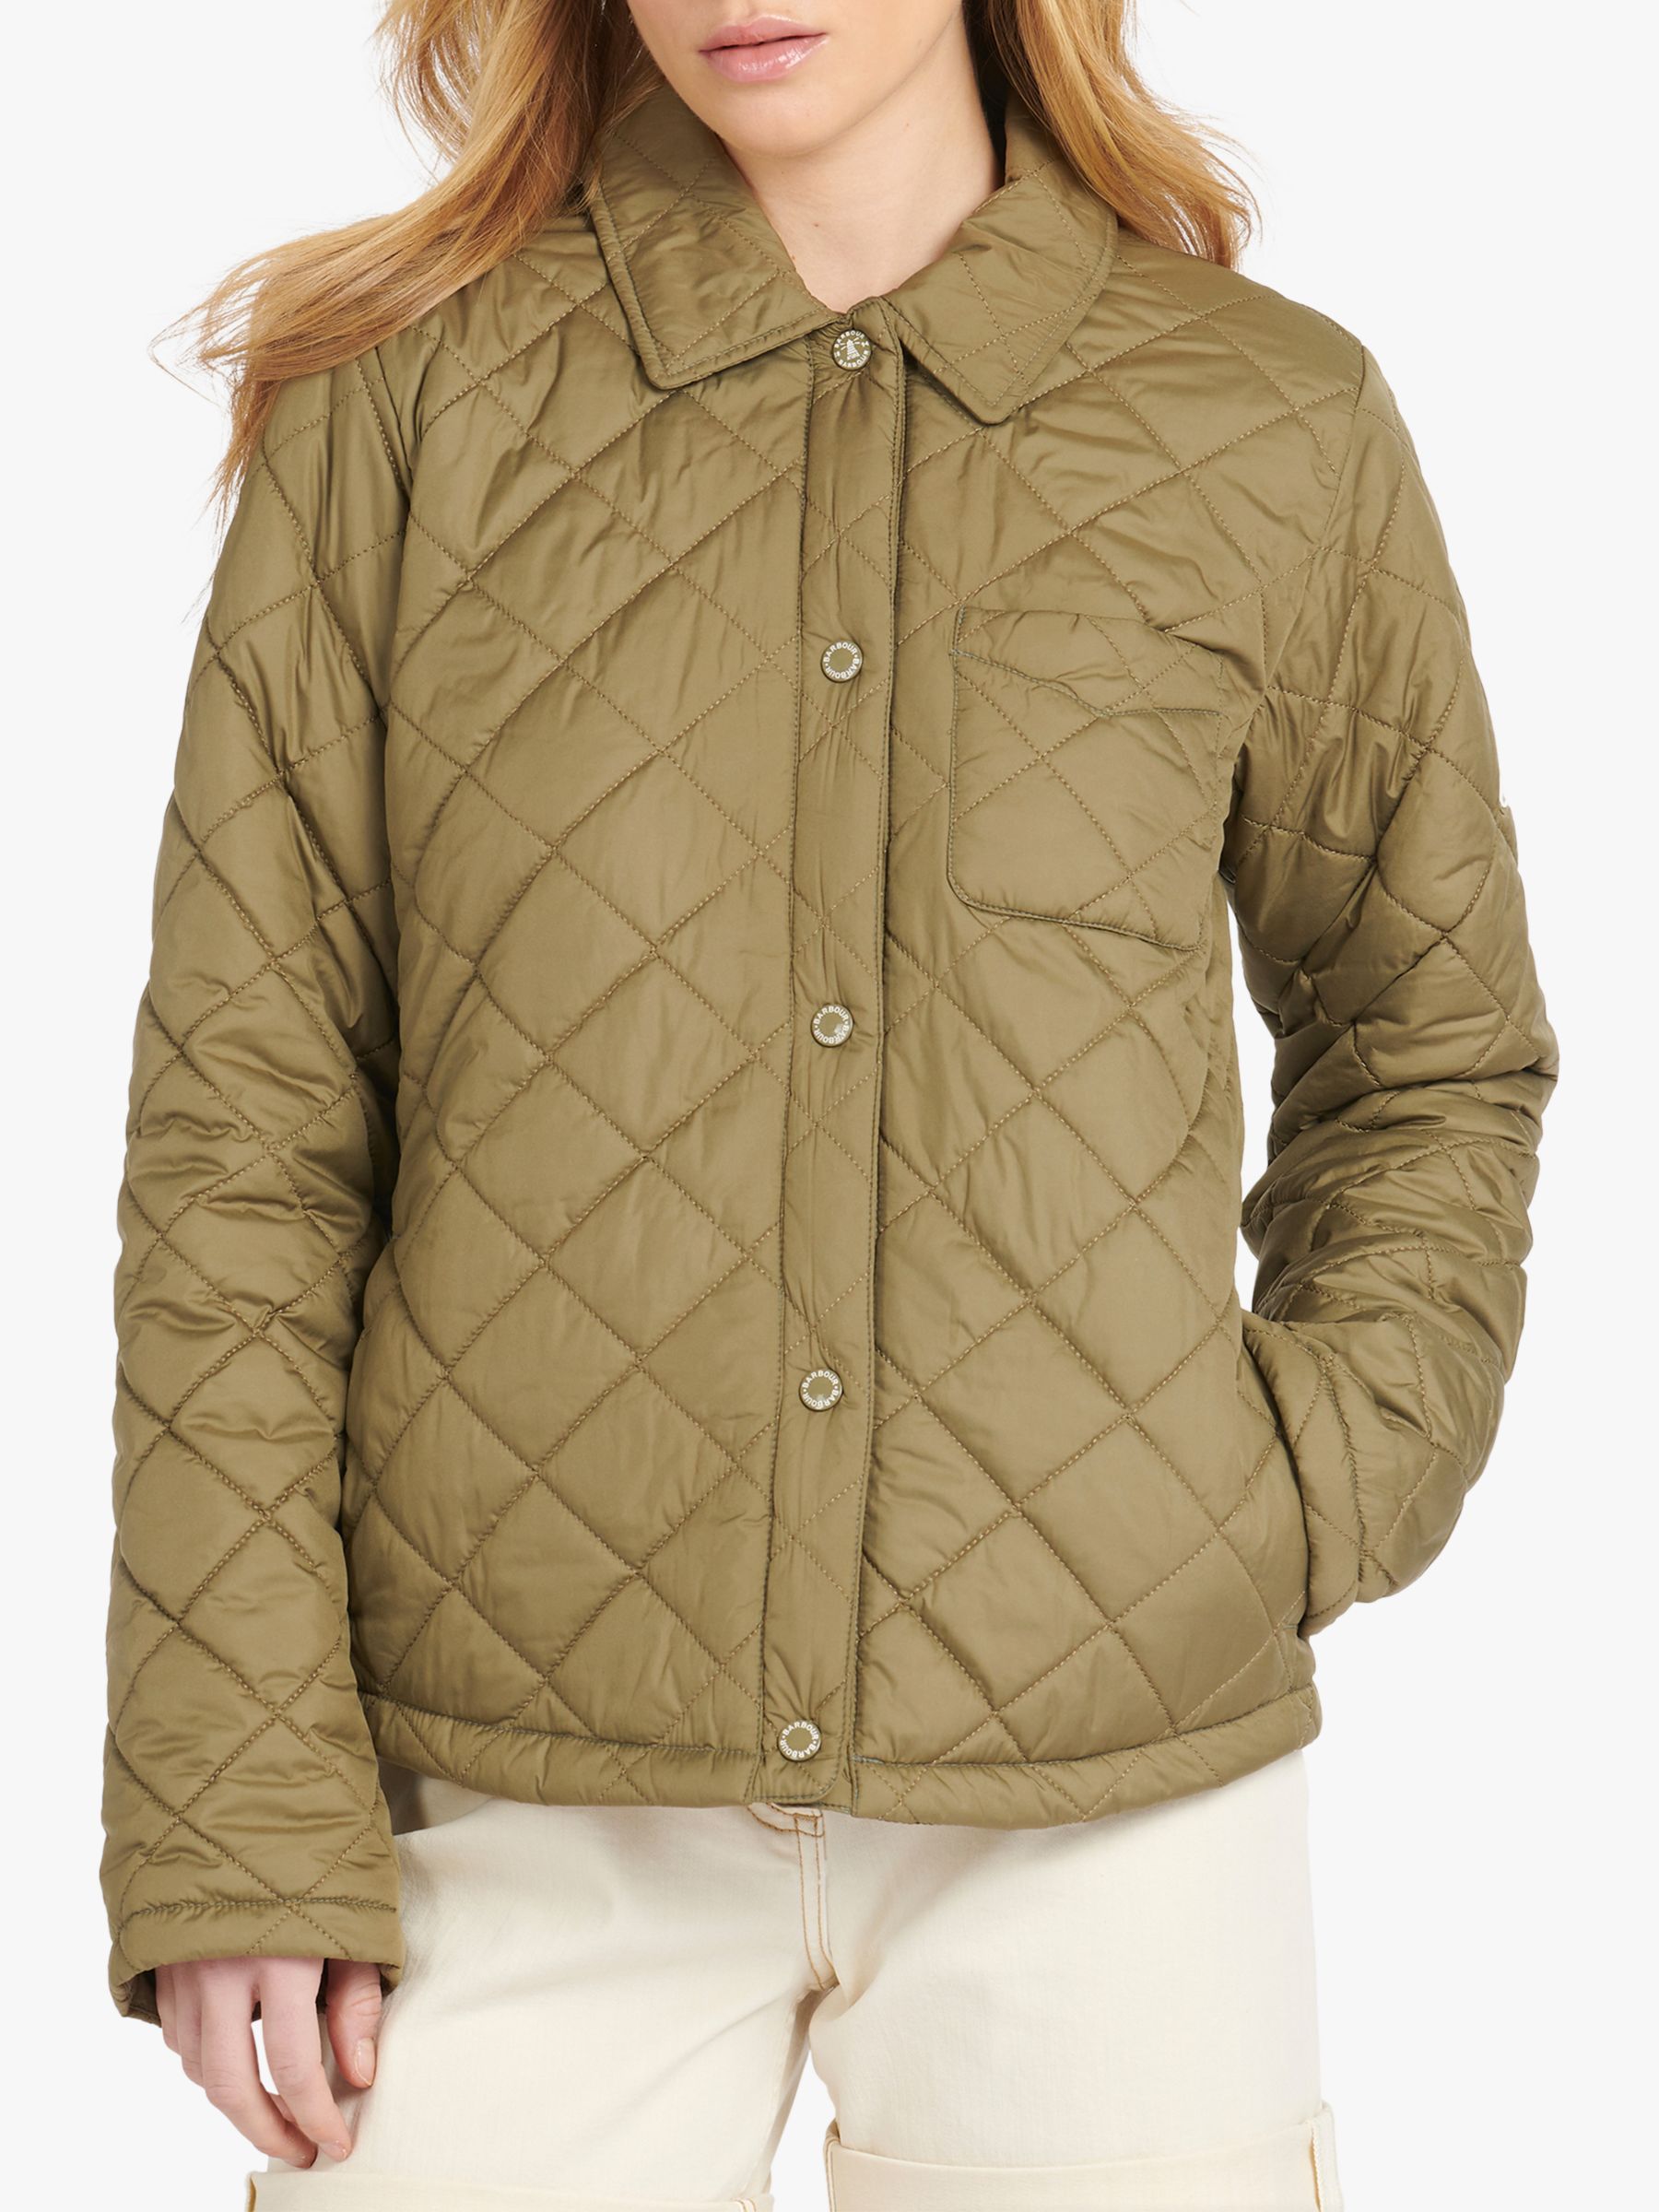 Barbour Blue Caps Quilted Jacket, Khaki at John Lewis & Partners